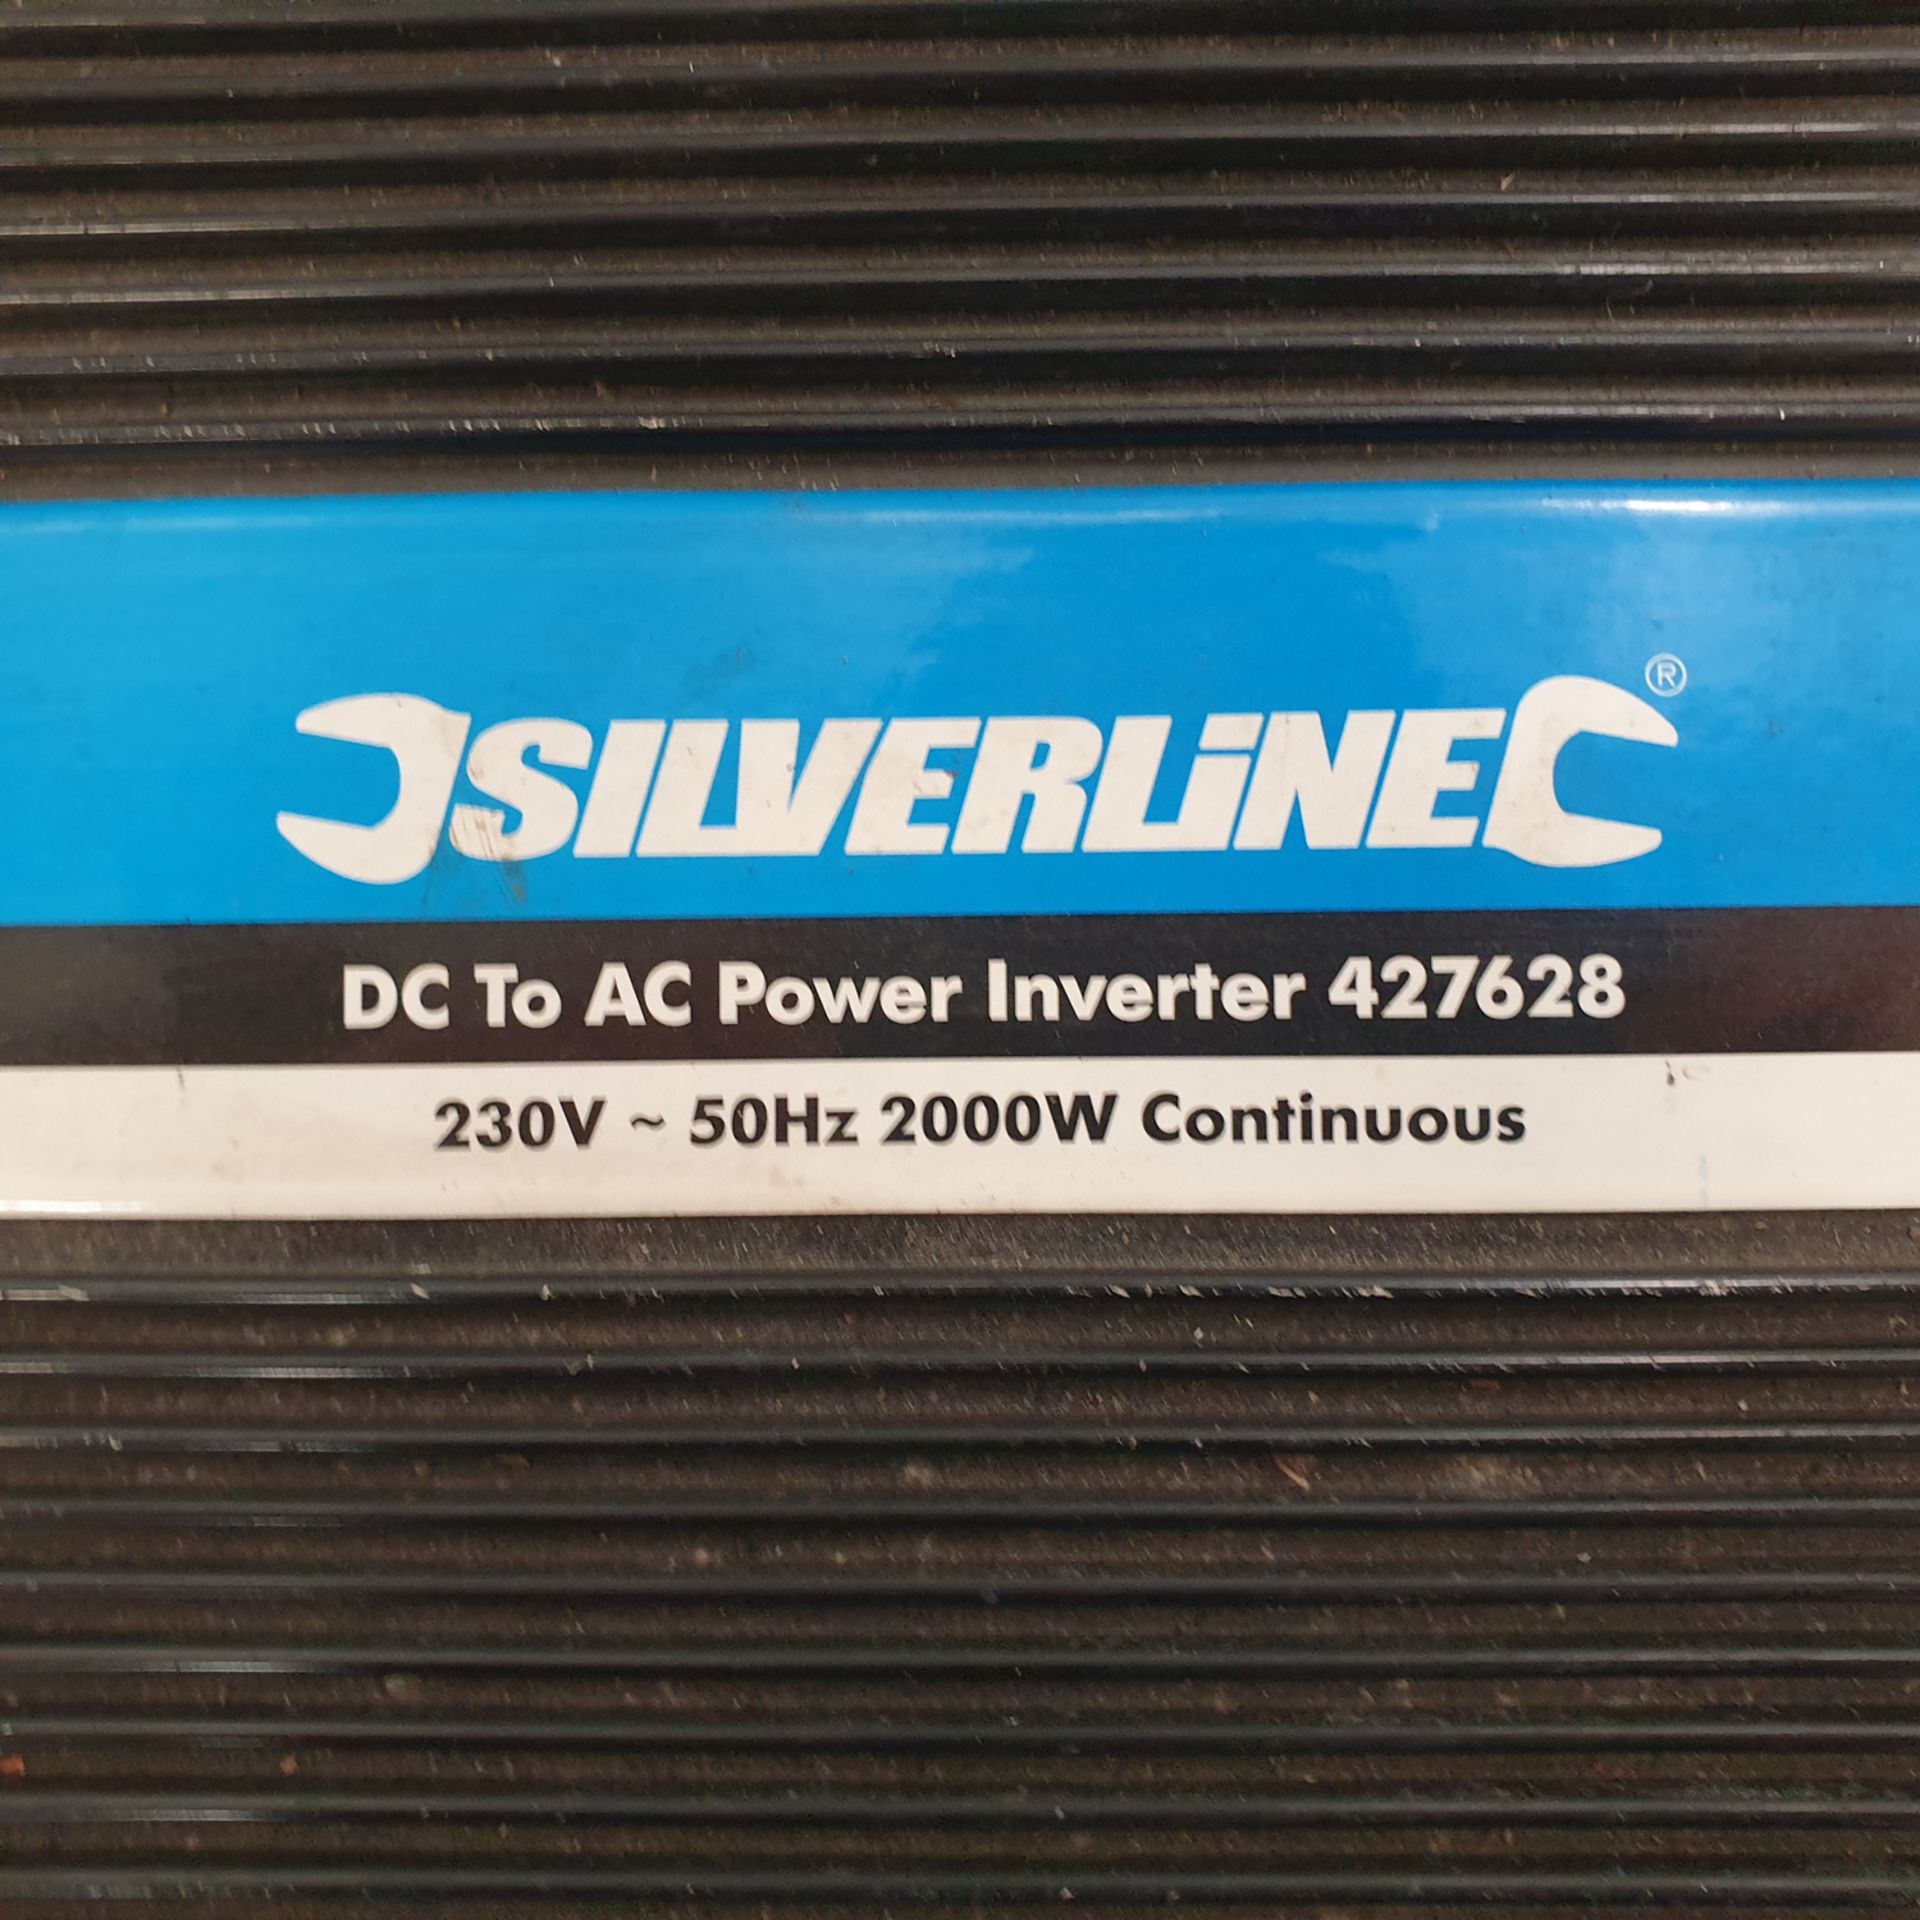 SILVERLINE DC to AC Power Inverter. Model 427628. 230V / 50Hz / 2000W Continuous. - Image 2 of 5